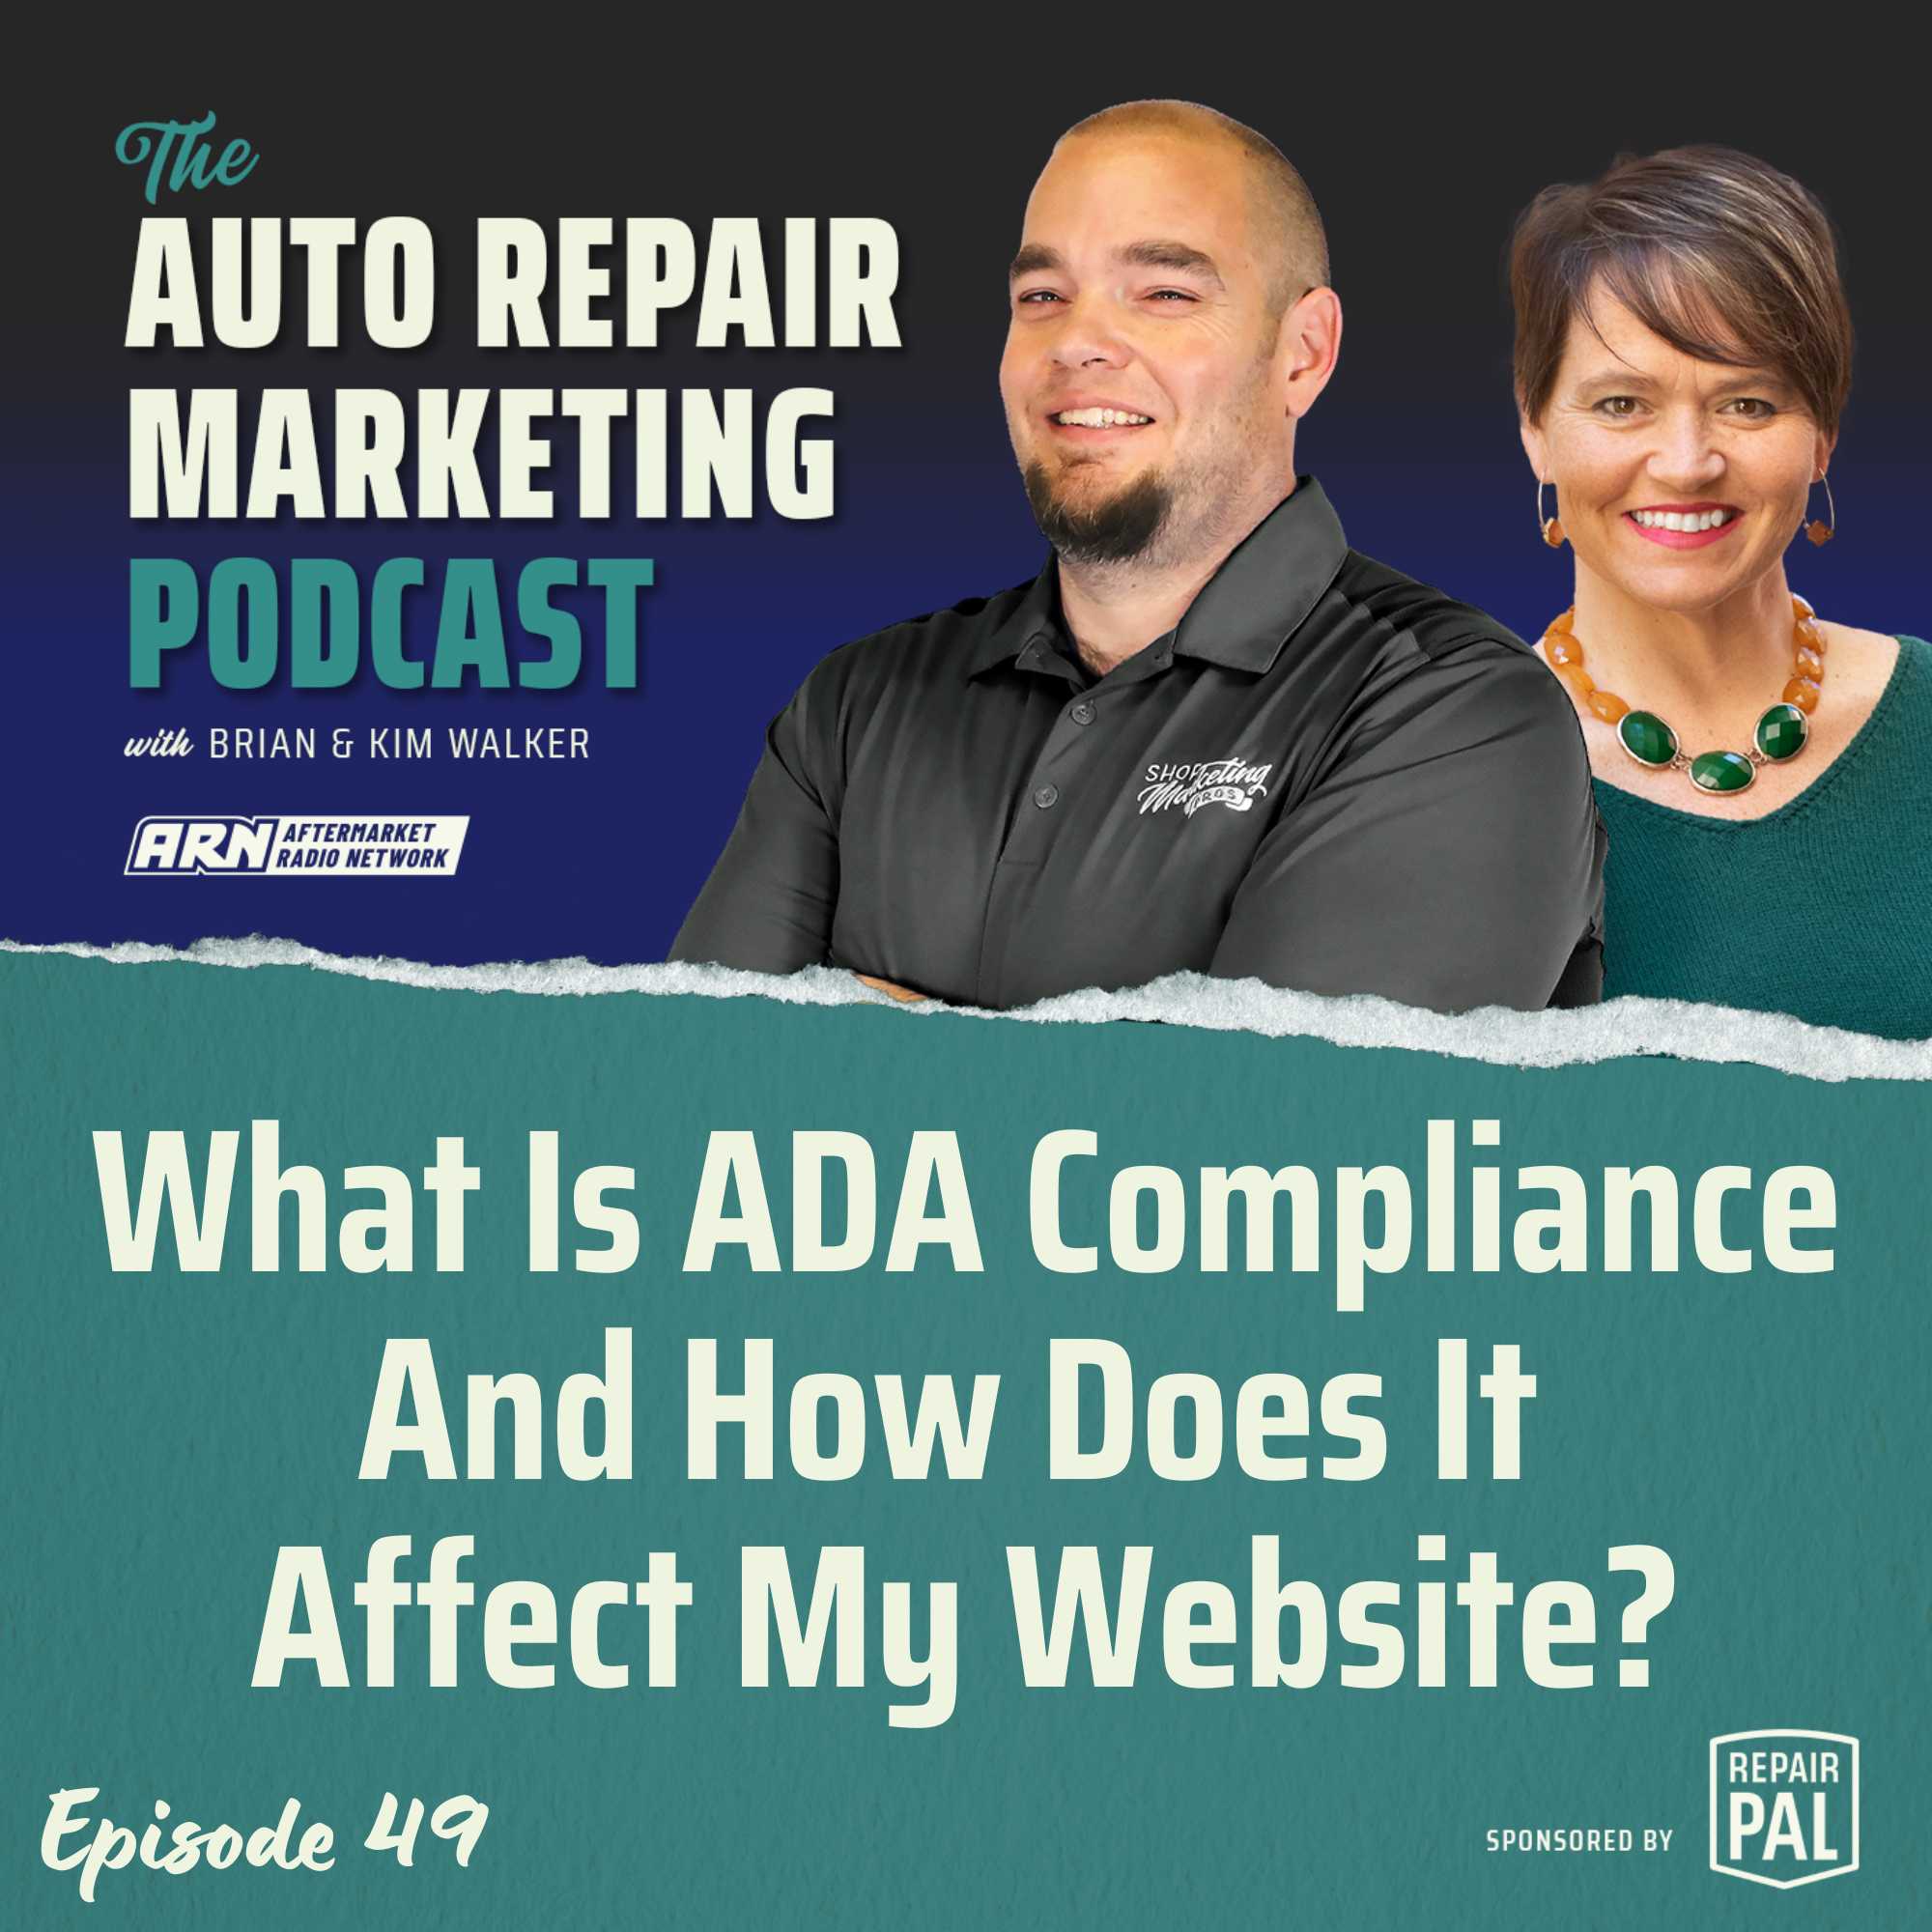 The Auto Repair Marketing Podcast Episode 49. Brian & Kim Walker talking about the topic "What Is ADA Compliance And How Does It Affect My Website?". Sponsored by Repair Pal.